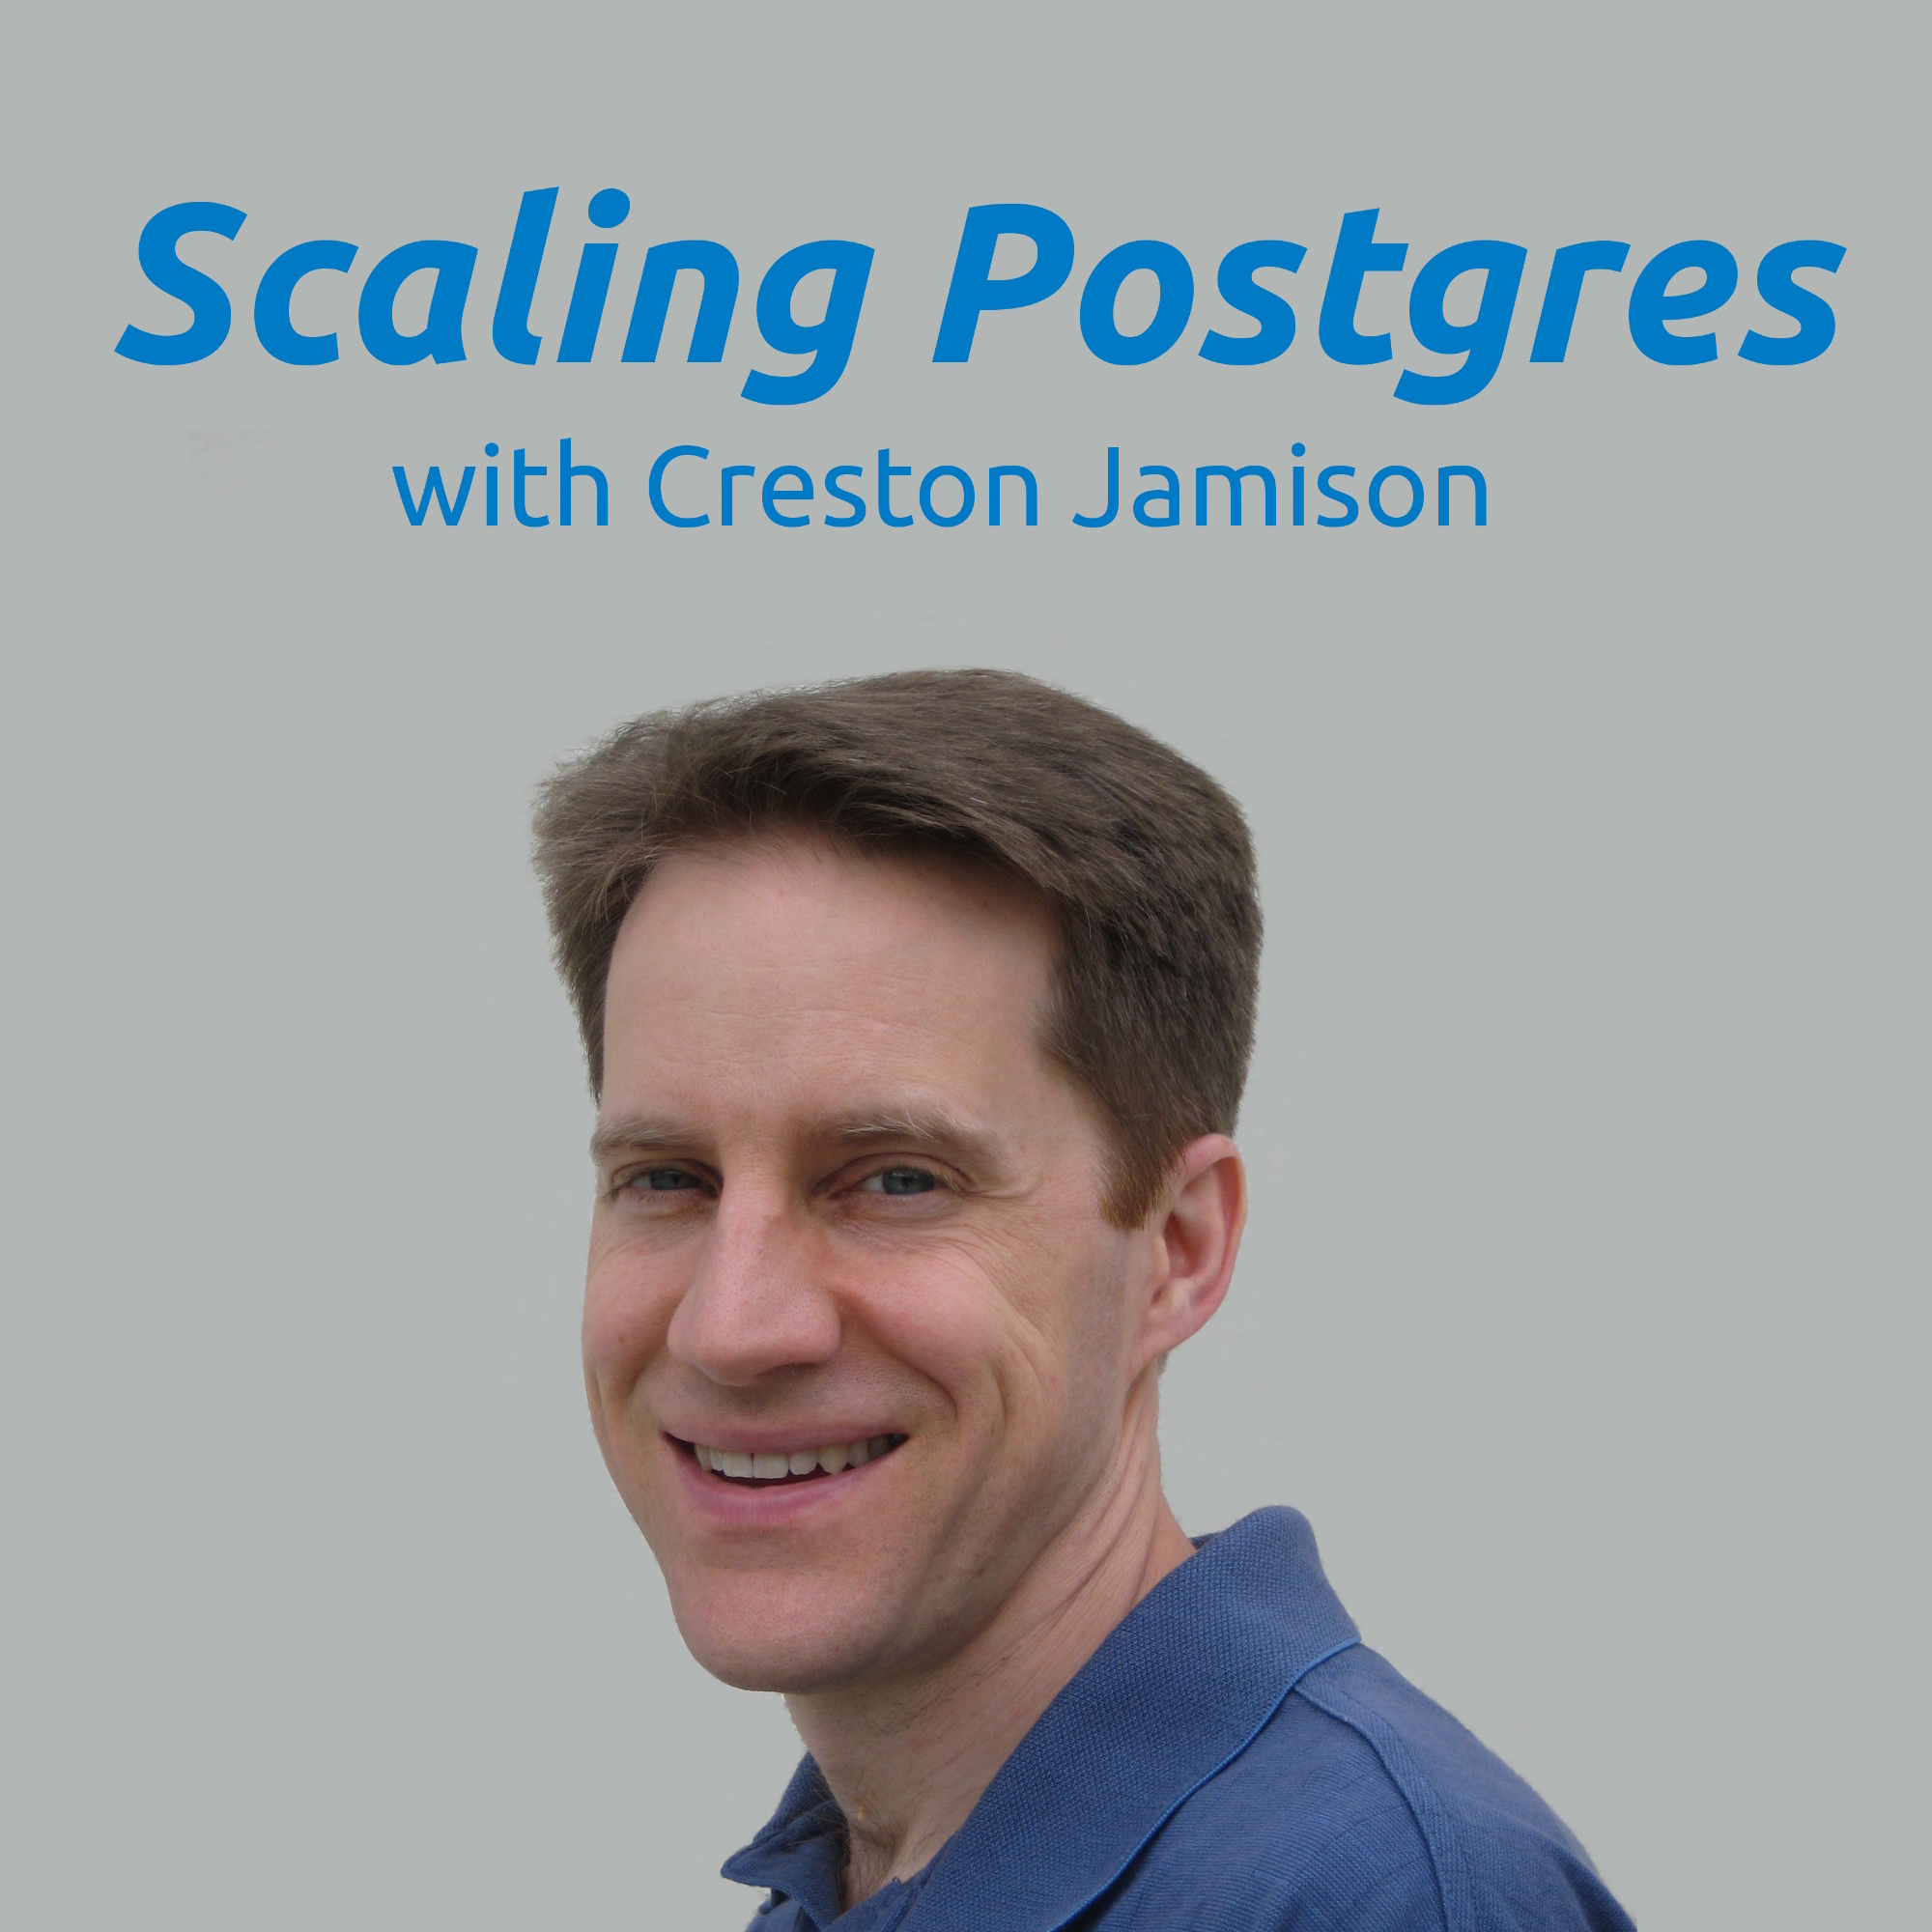 psql Tips, Postgres 13 Upgrade, Roles Hierarchy, Replica Scaling | Scaling Postgres 160